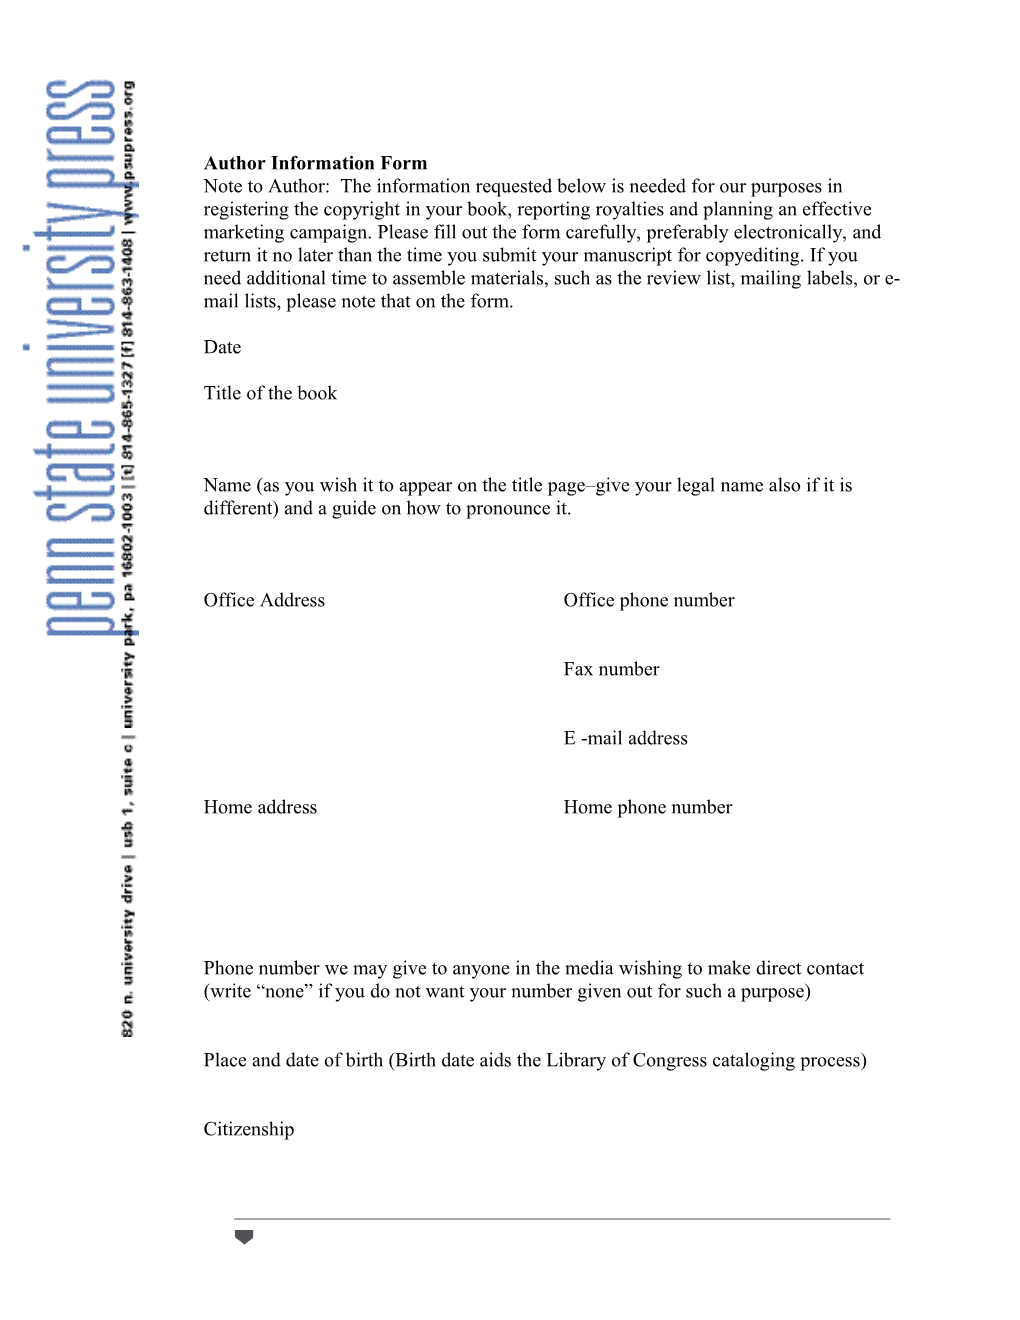 Author Information Form